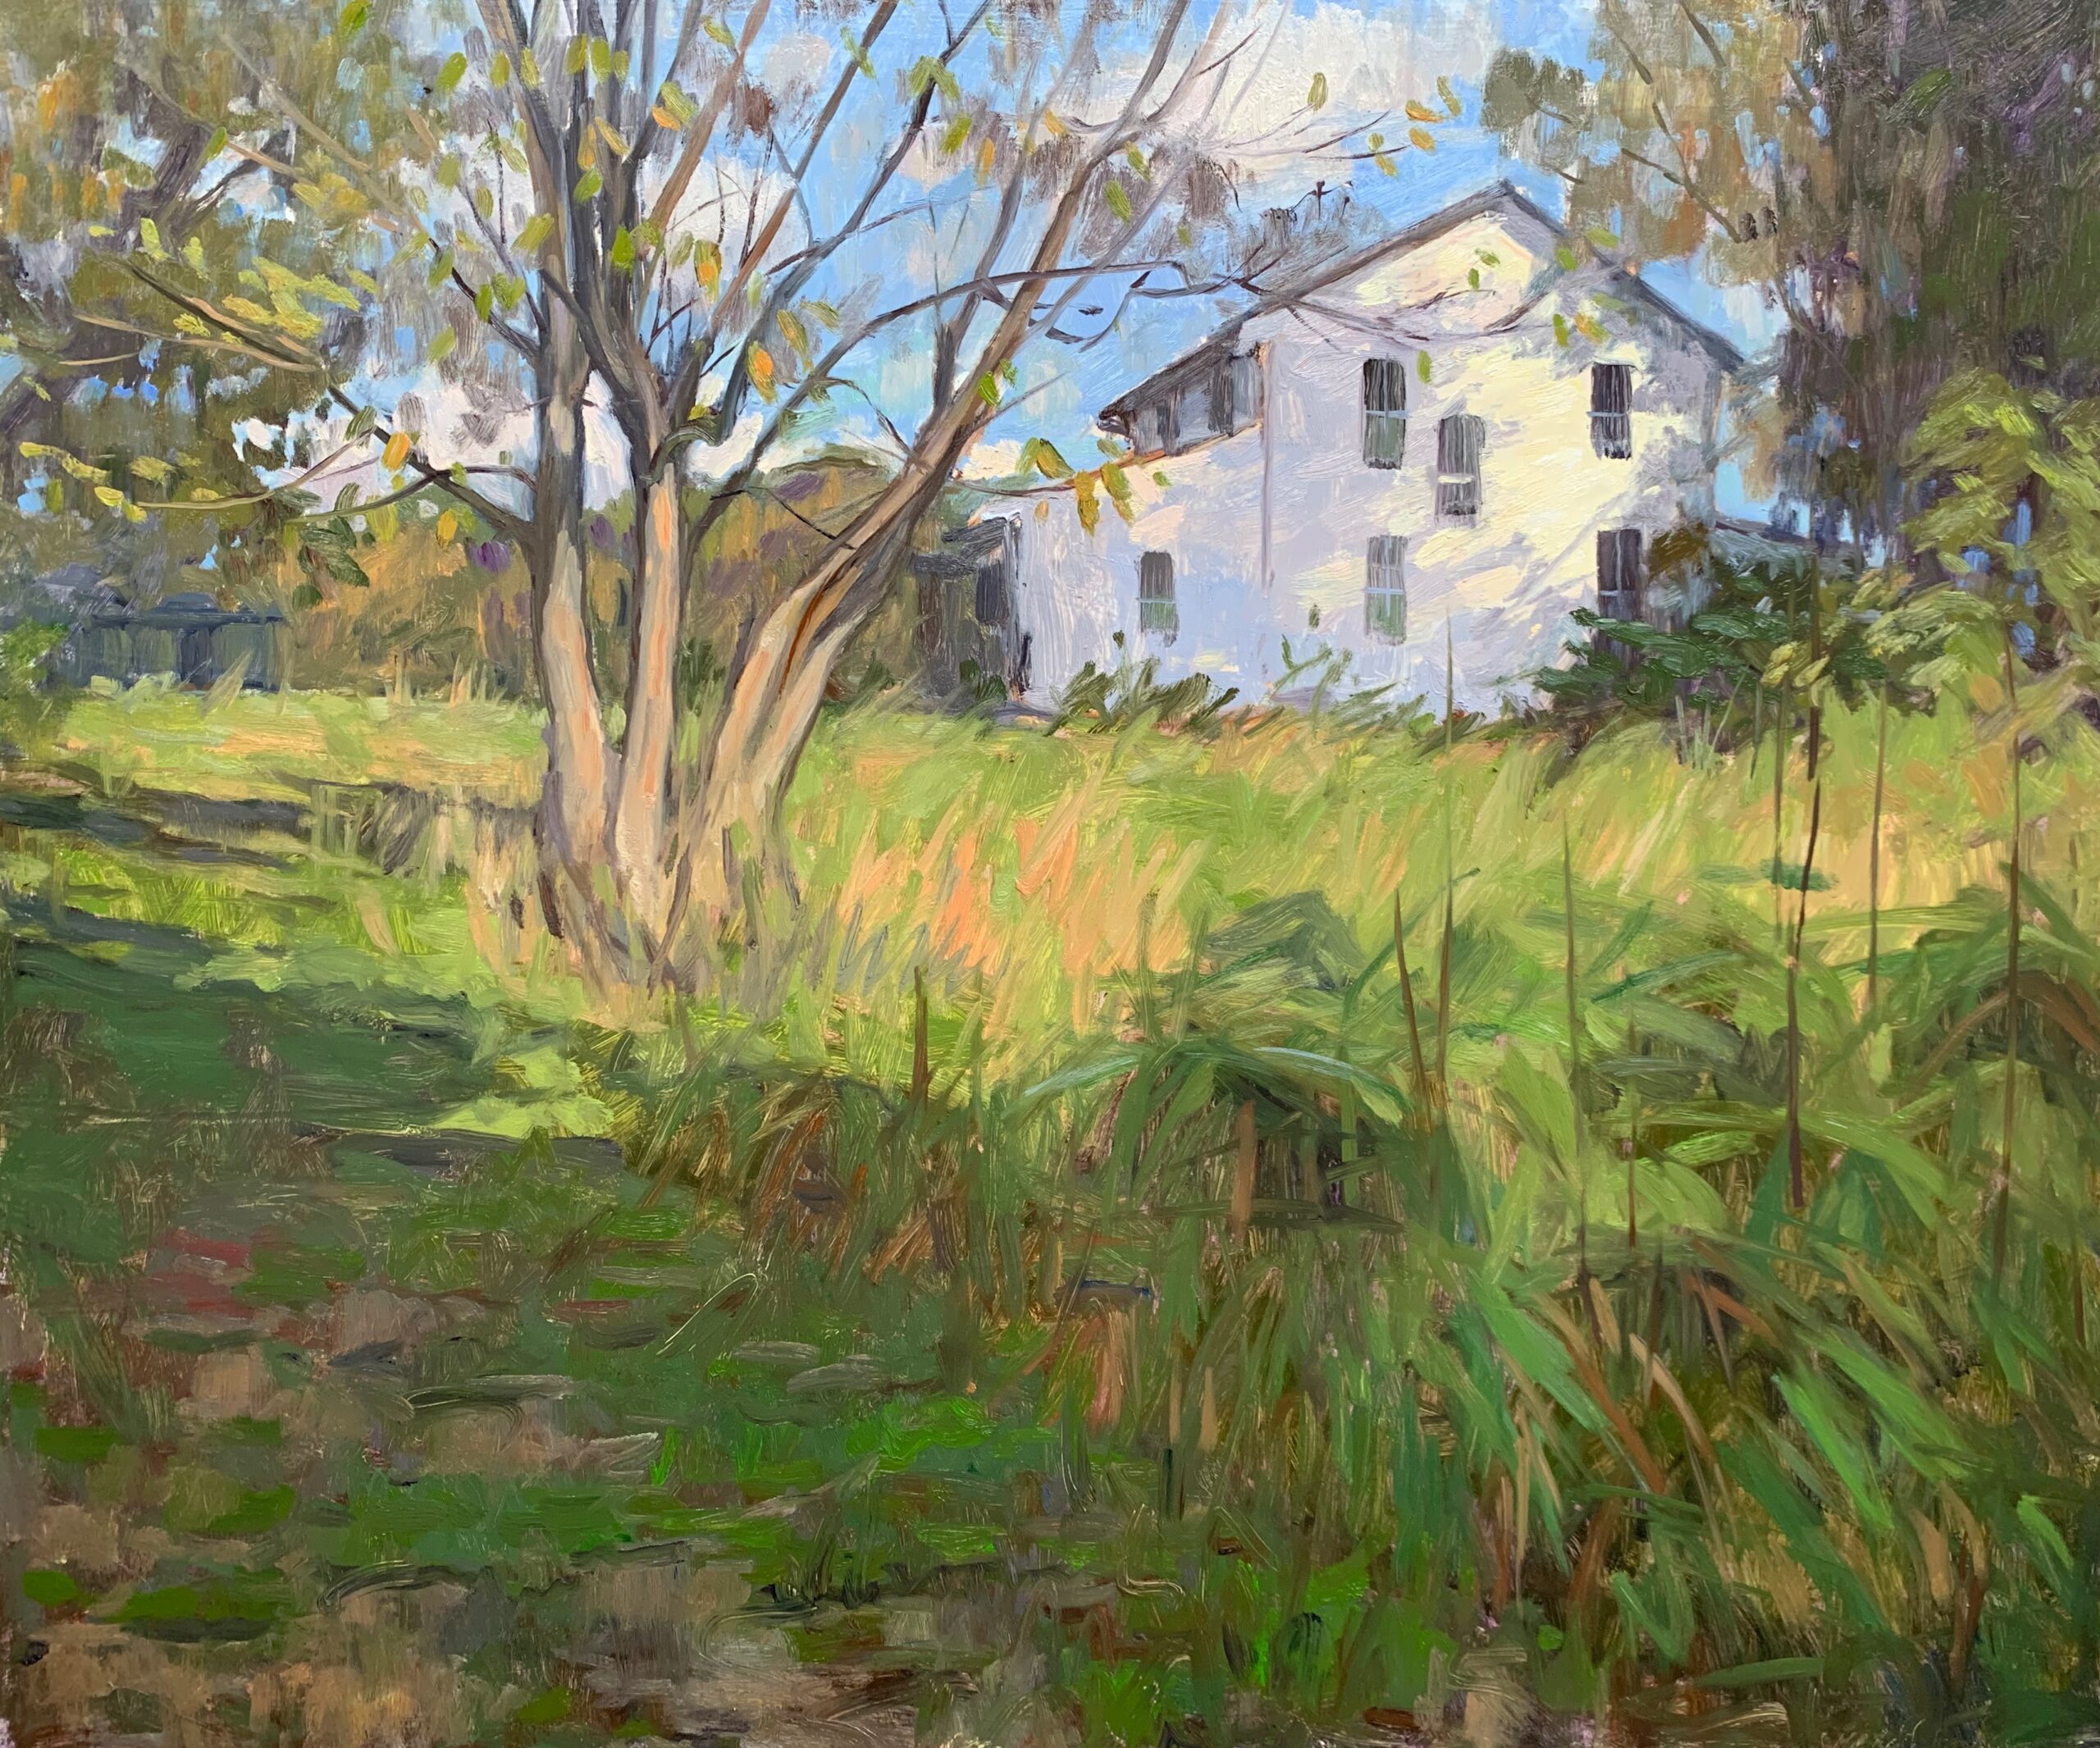 Alison Barry, "Late Fall," 2022, oil, 20 x 24 in., Available from the artist, Plein air